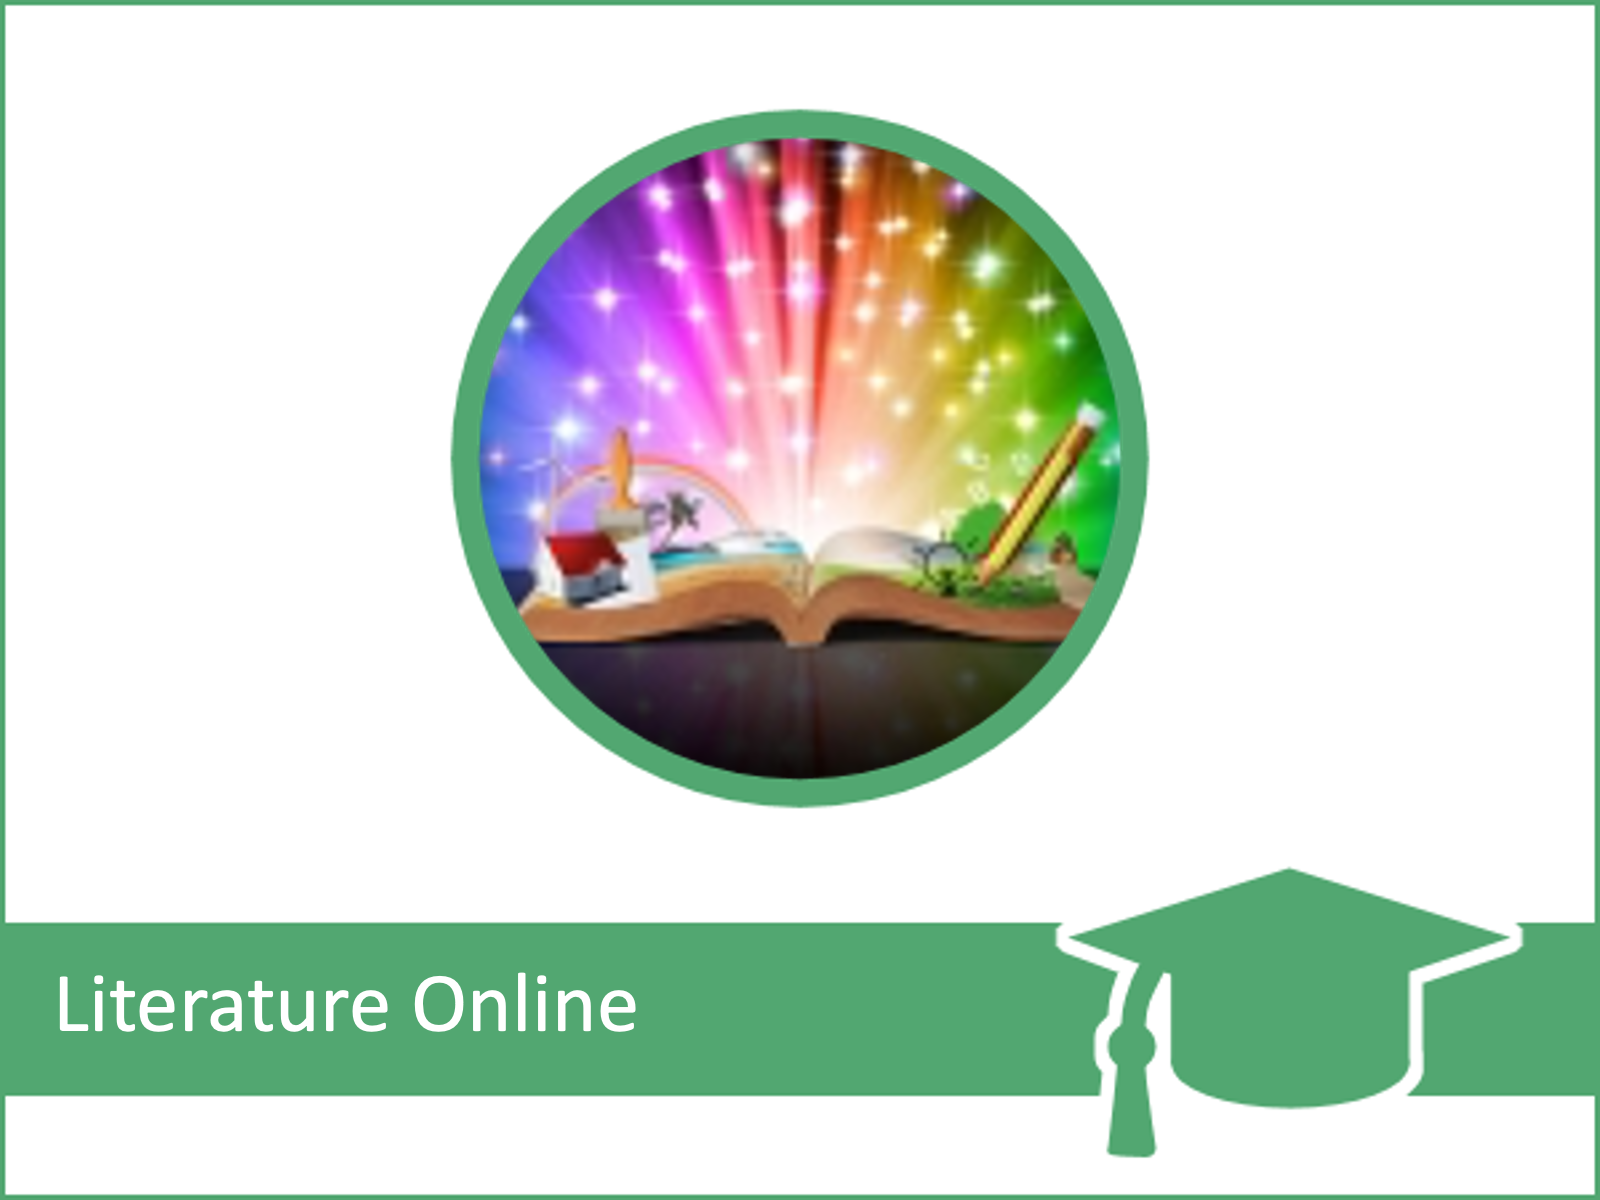 Learn More About Literature Online with INFOhio's Self-paced Class